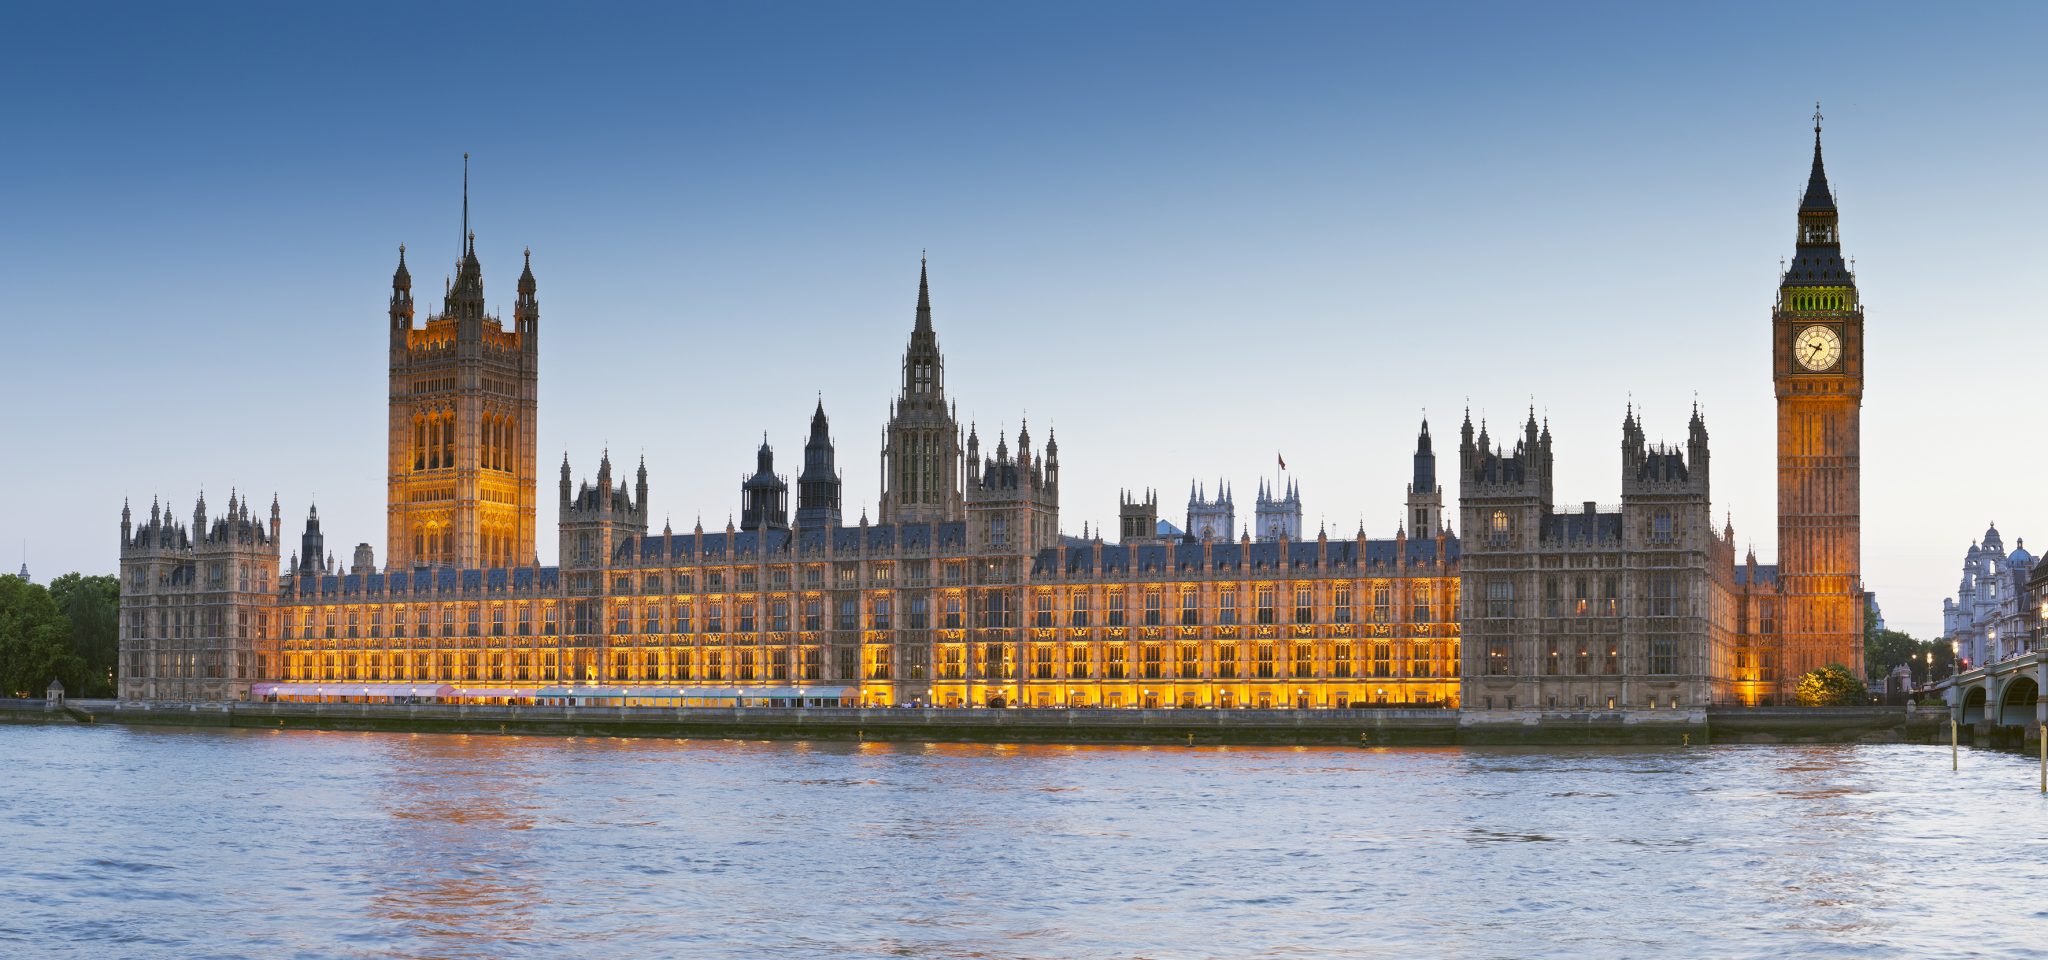 Labour/Co-op MP introduces bill to improve co-ops’ access to capital